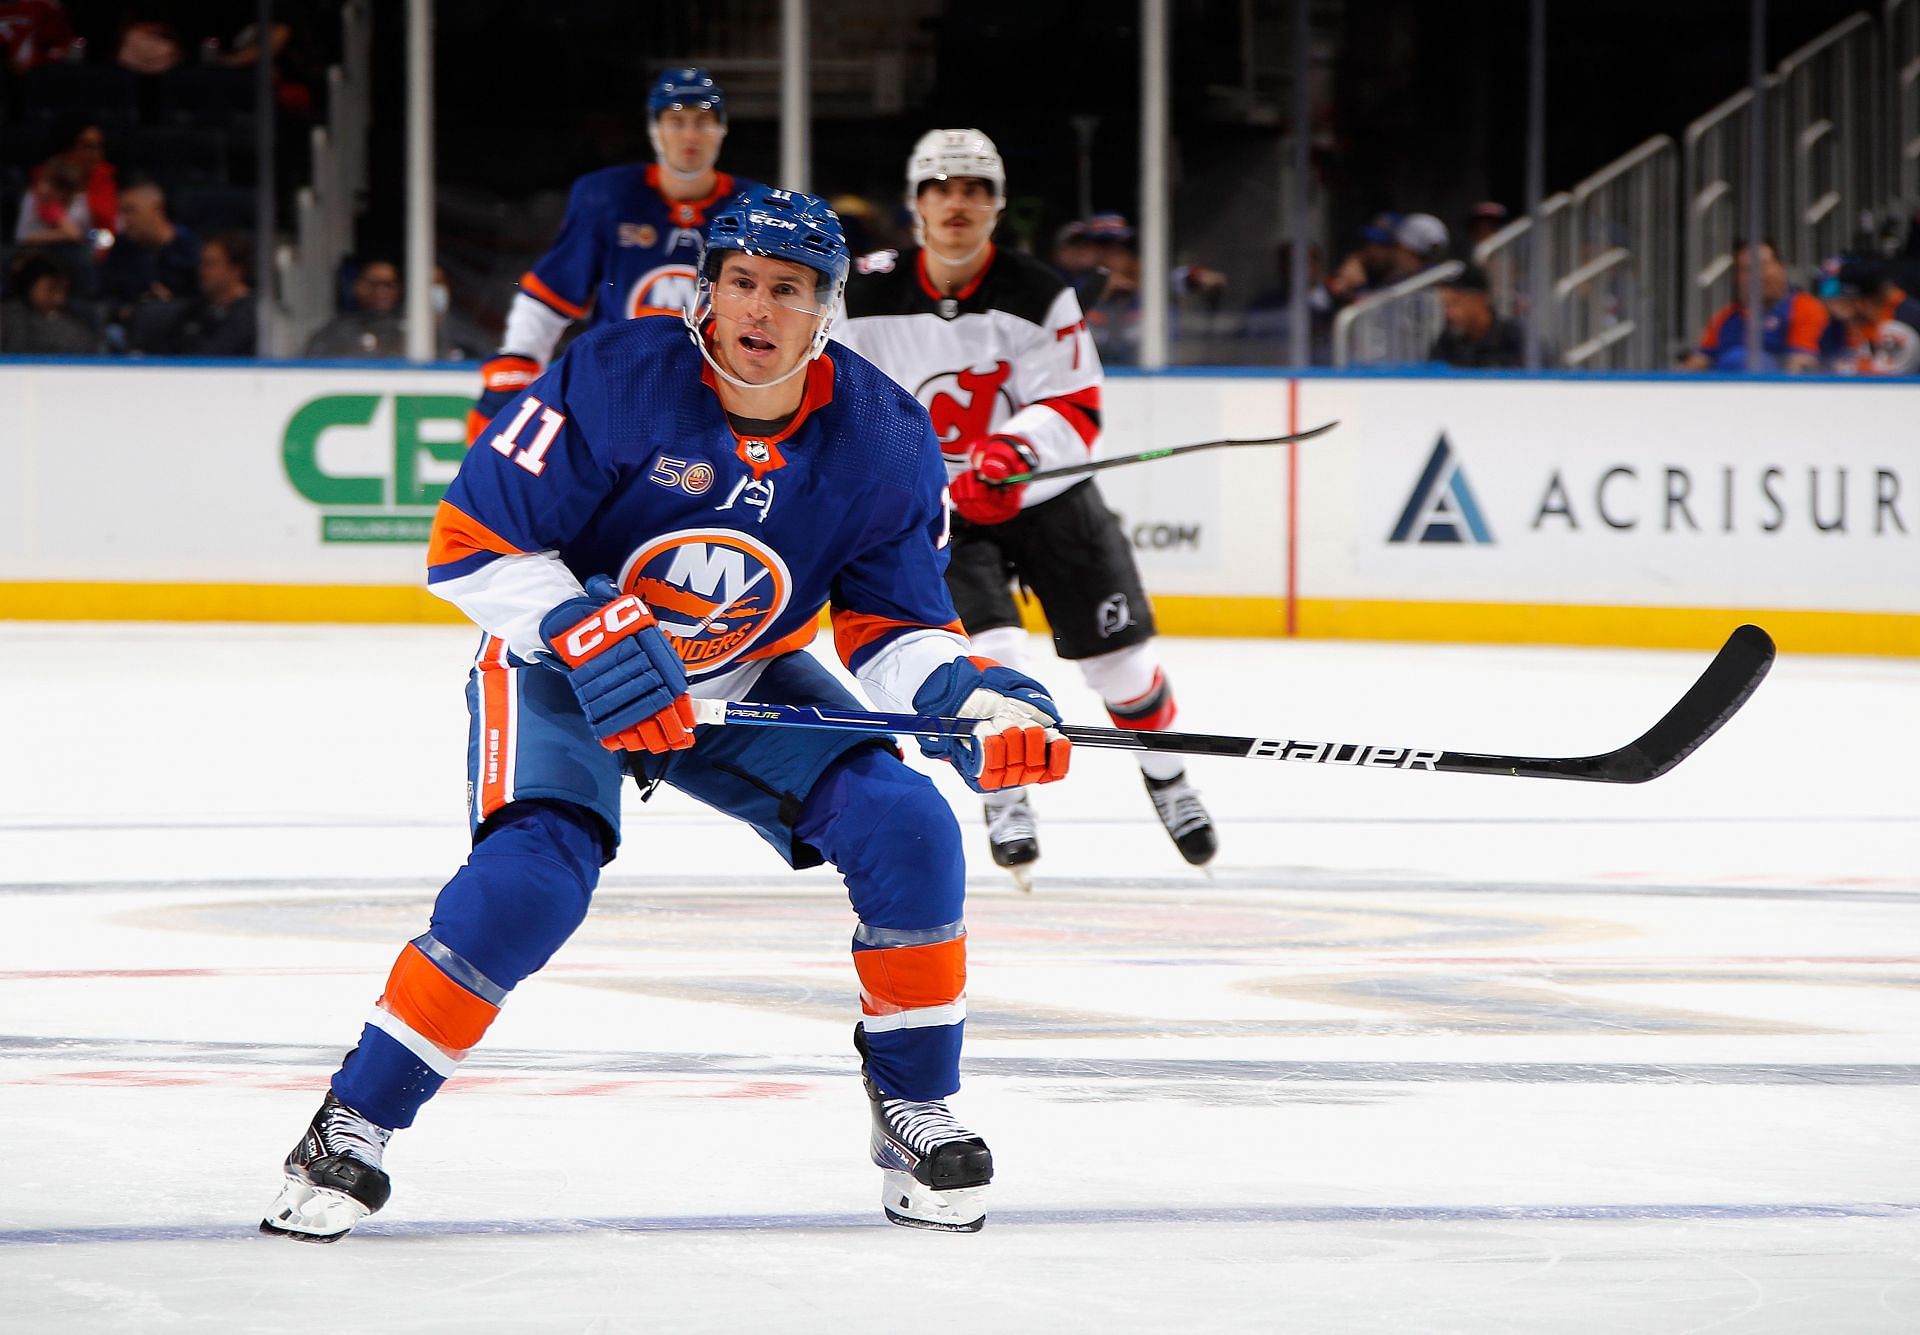 Islanders Zach Parise is going to go off against Minnesota isn't he?